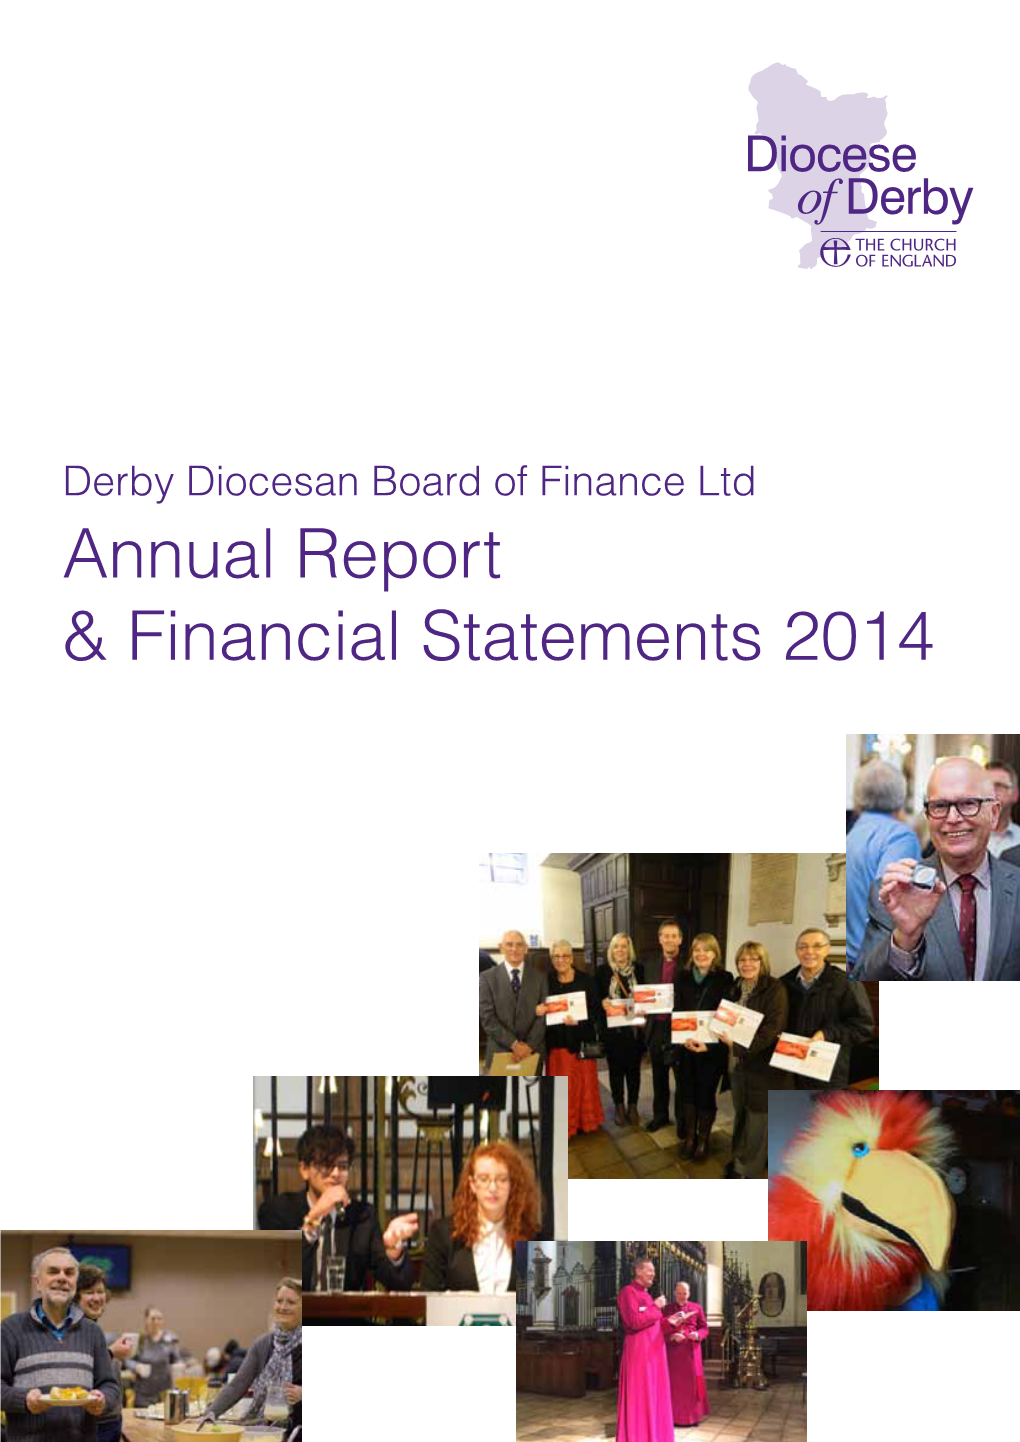 Annual Report & Financial Statements 2014